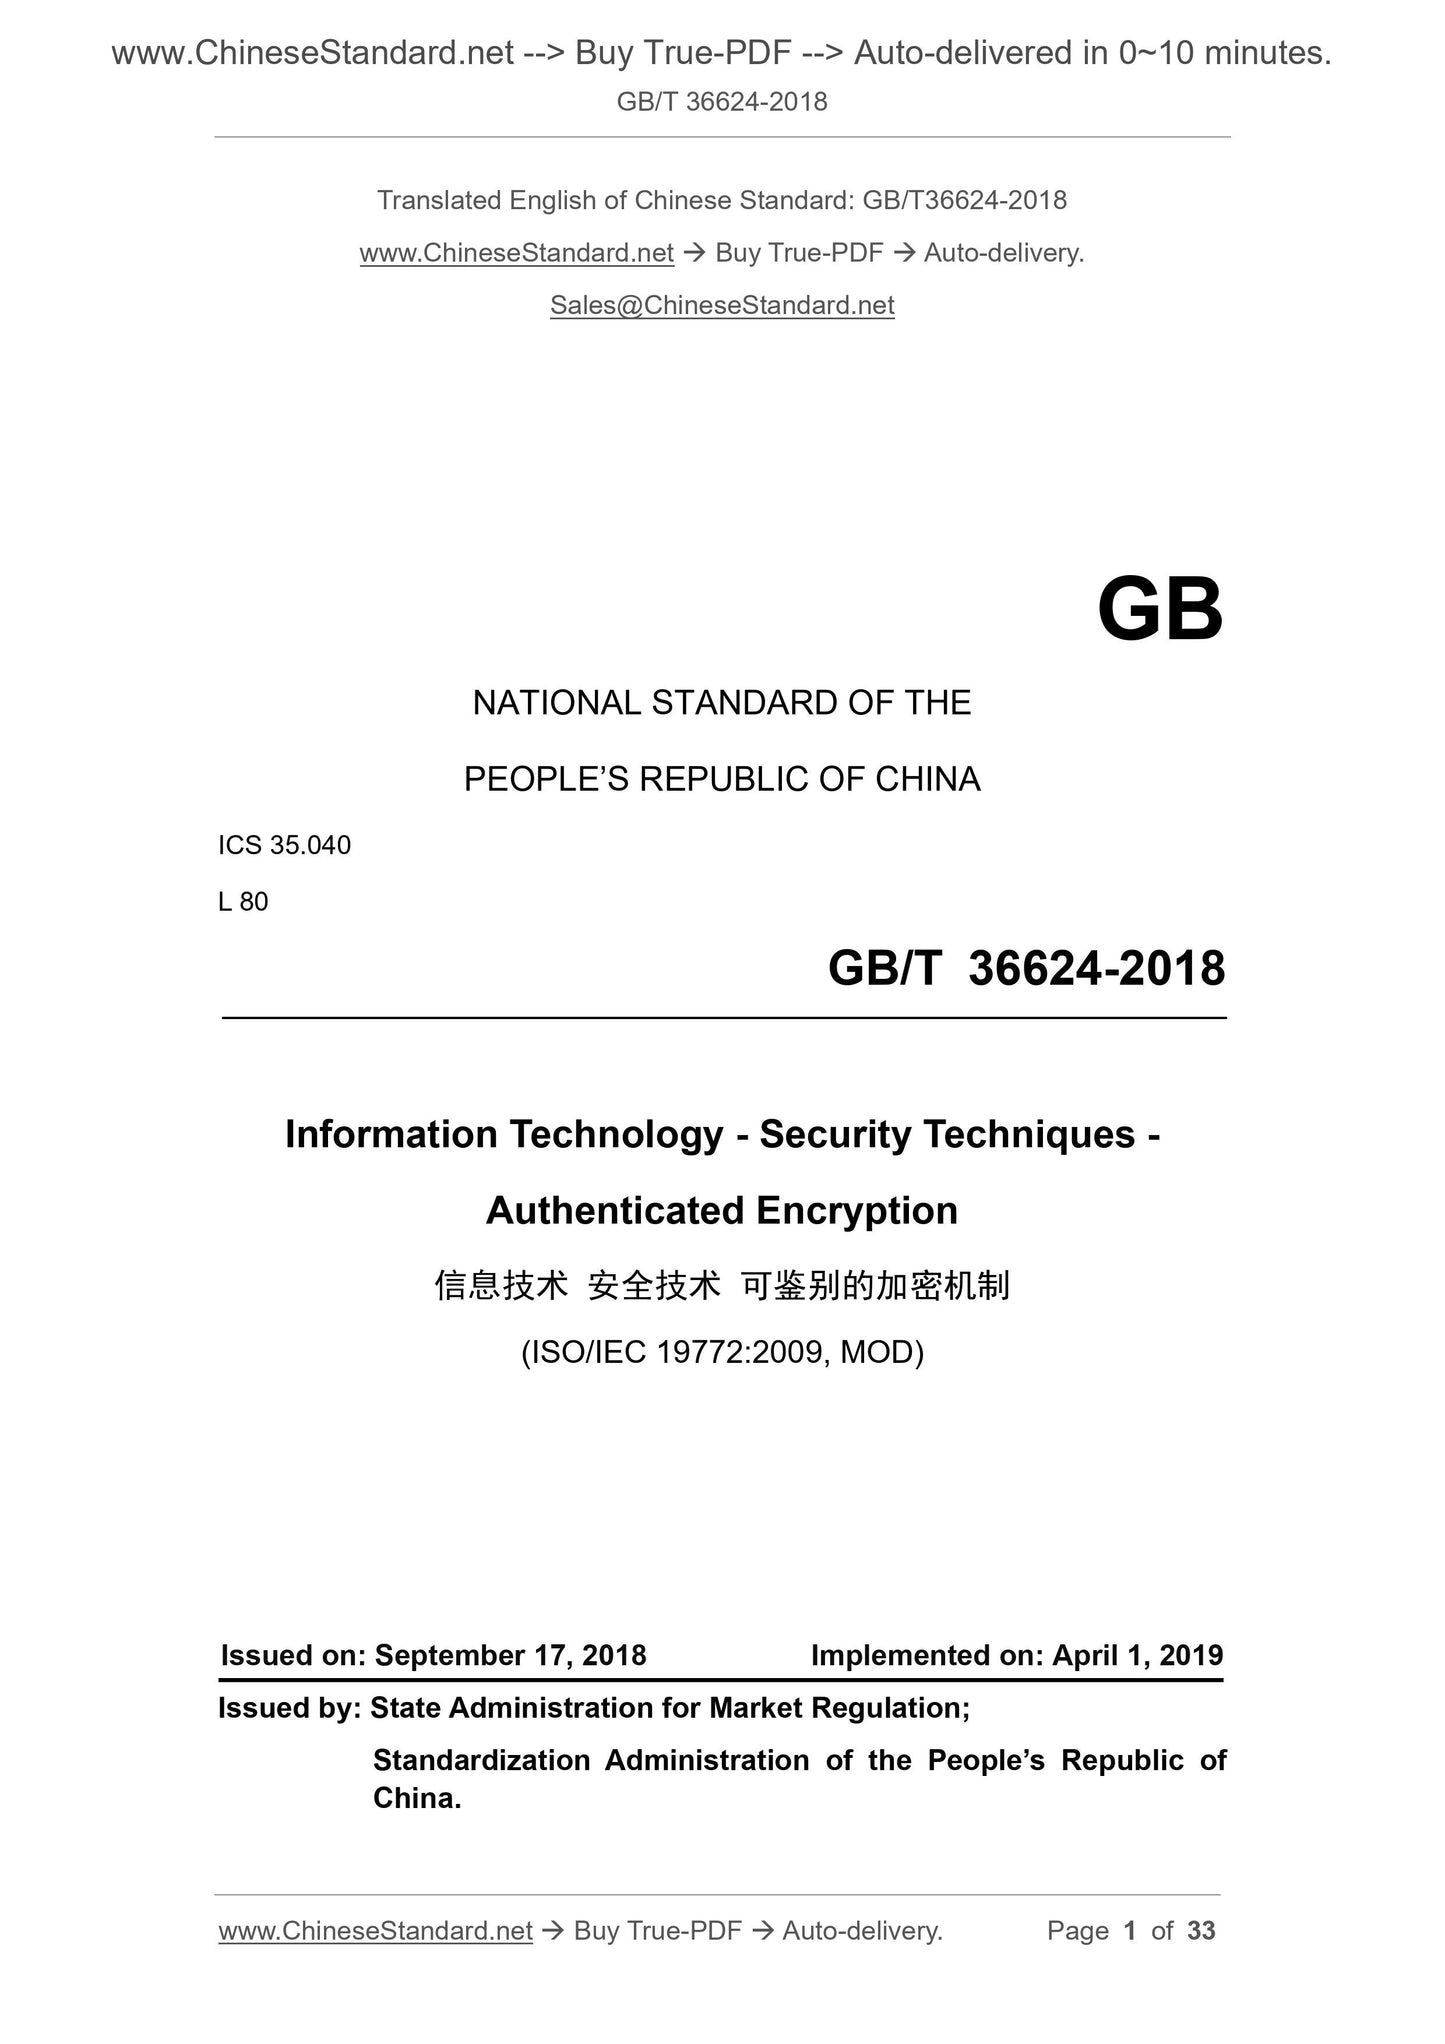 GB/T 36624-2018 Page 1